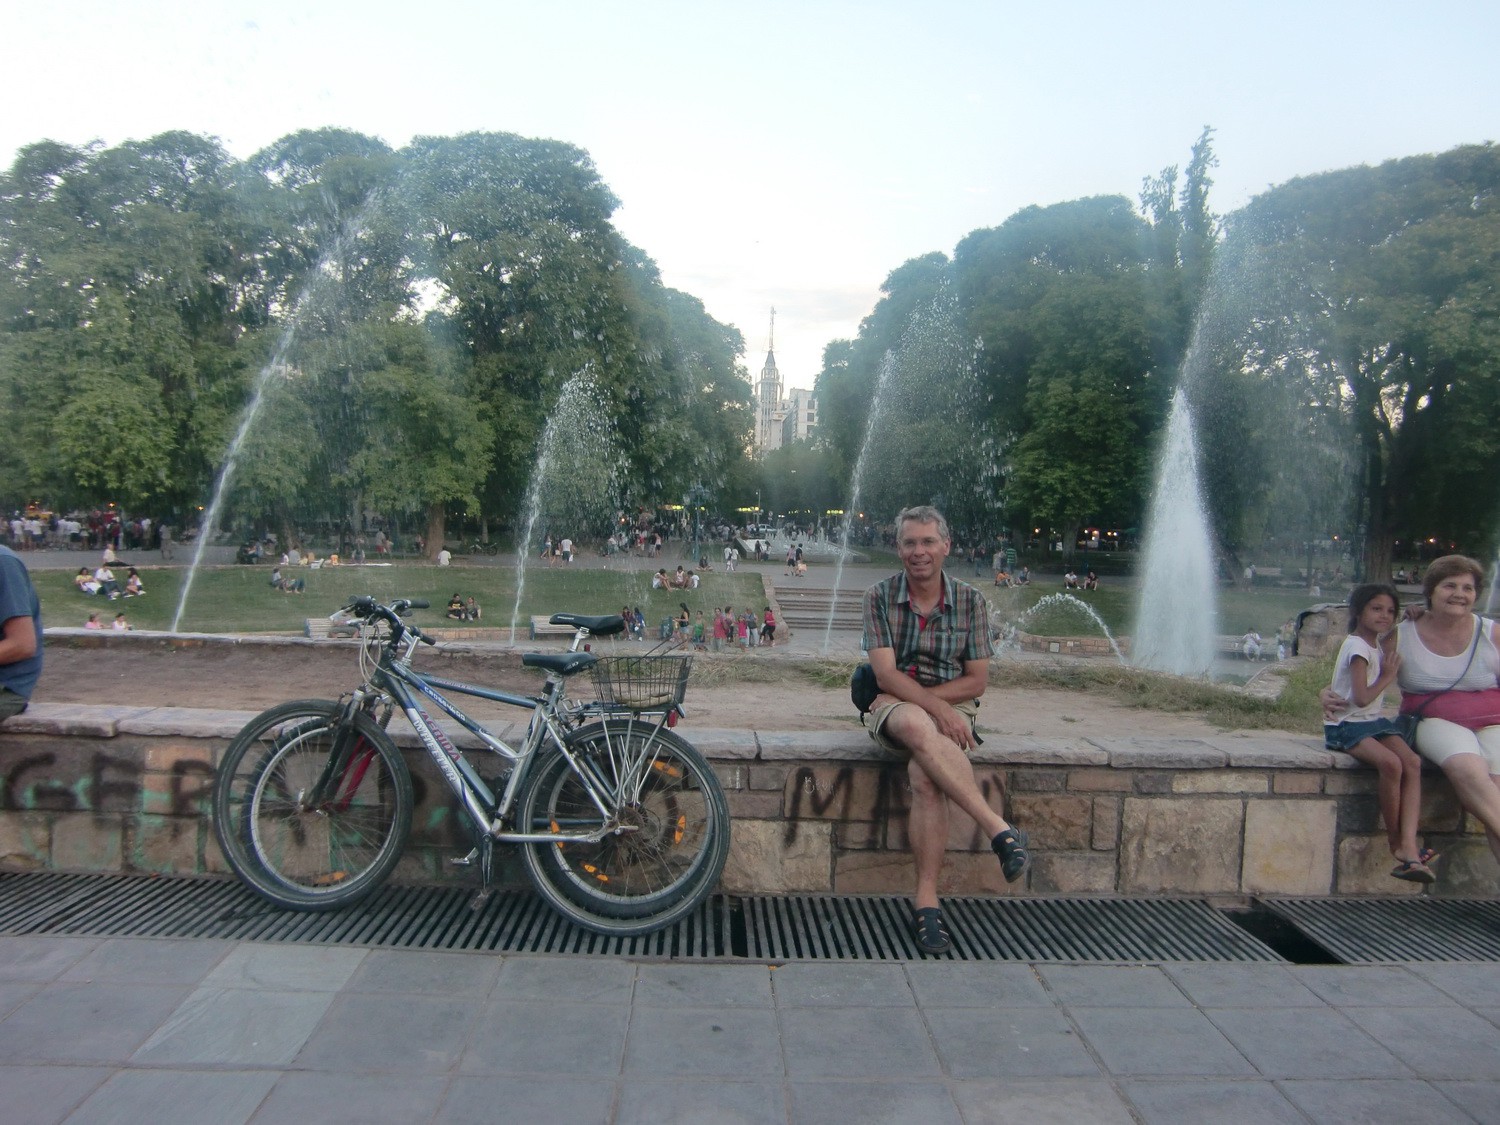 The last time with our bicycles - Plaza Independencia in Mendoza